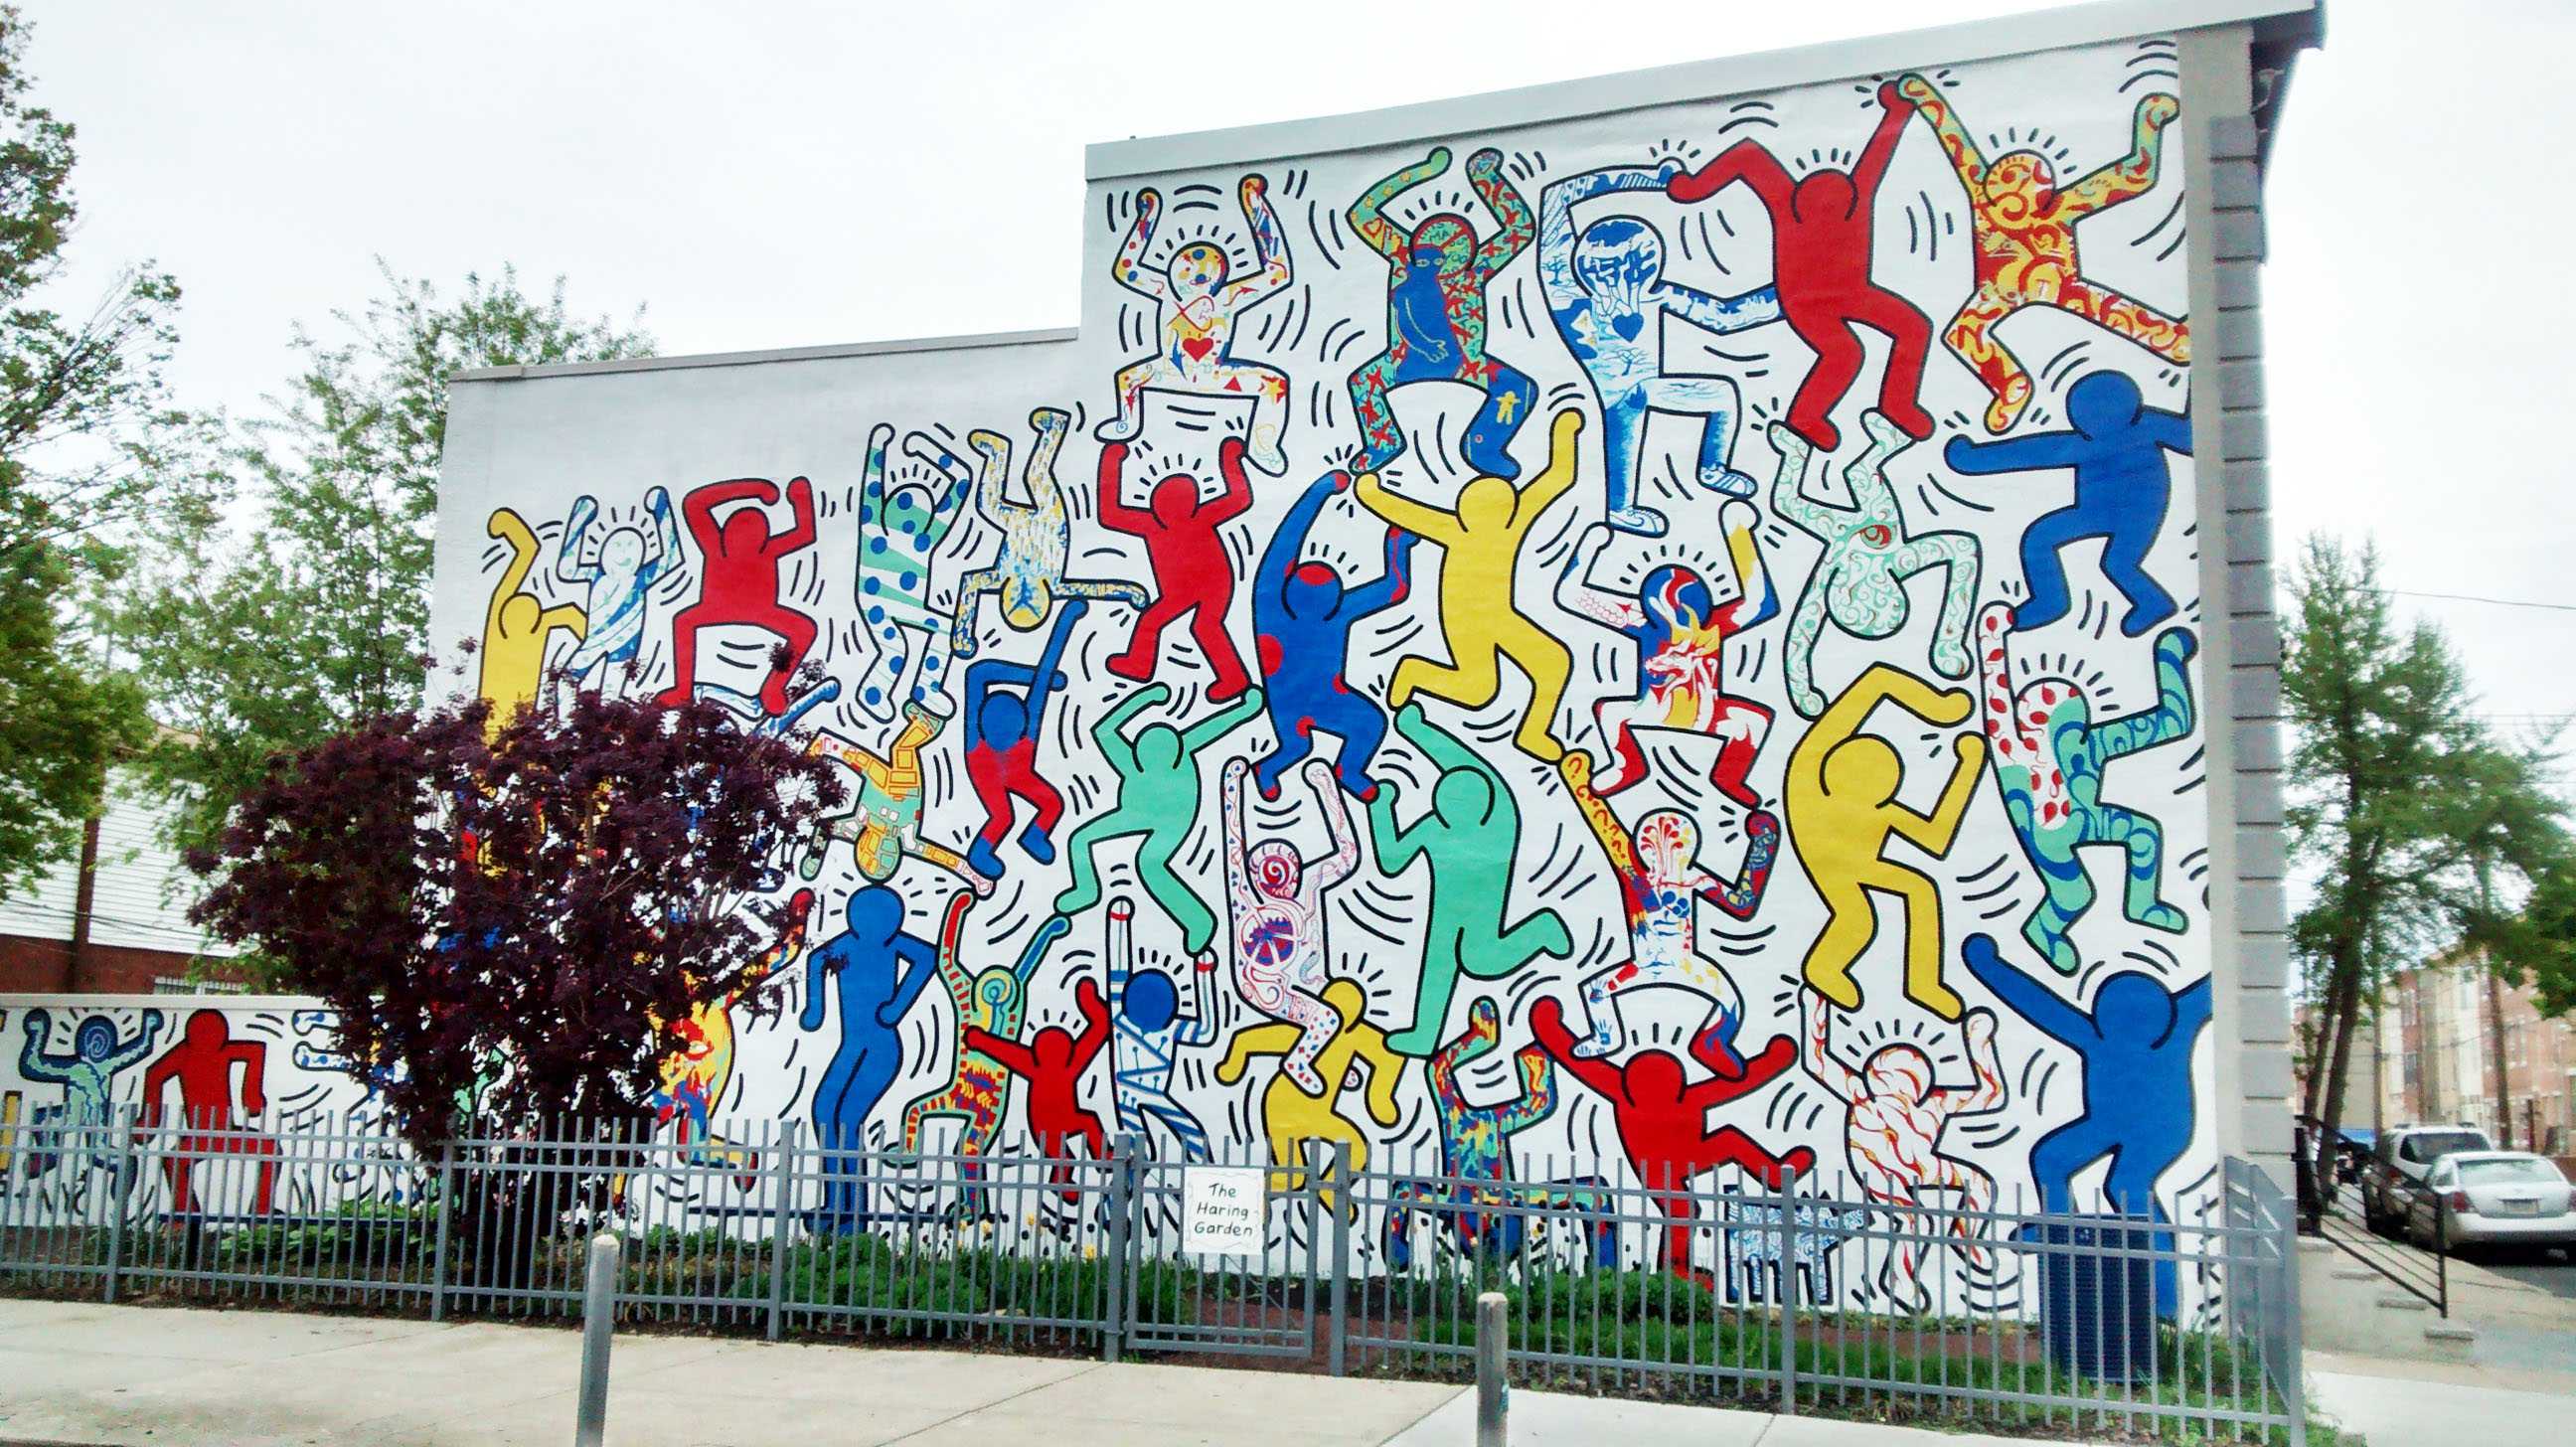 Walk It Out in Keith Haring's footsteps - The Daily Iowan